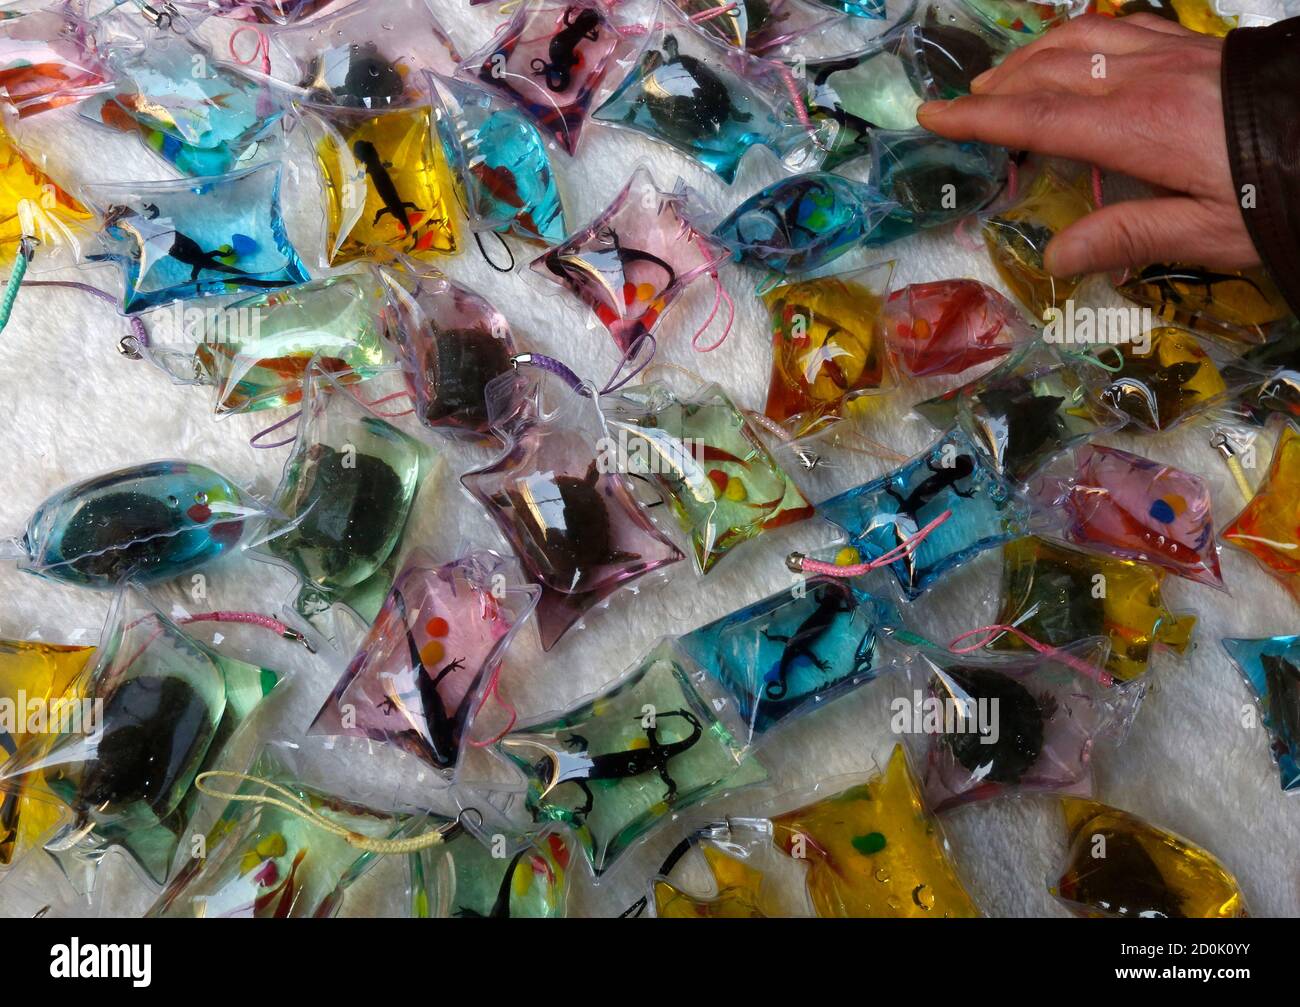 A vendor arranges small plastic bags holding fish, turtles and salamanders  on display for sale at a shopping district in Beijing March 7, 2013. Each  bag, filled with oxygen and nutritional liquid,